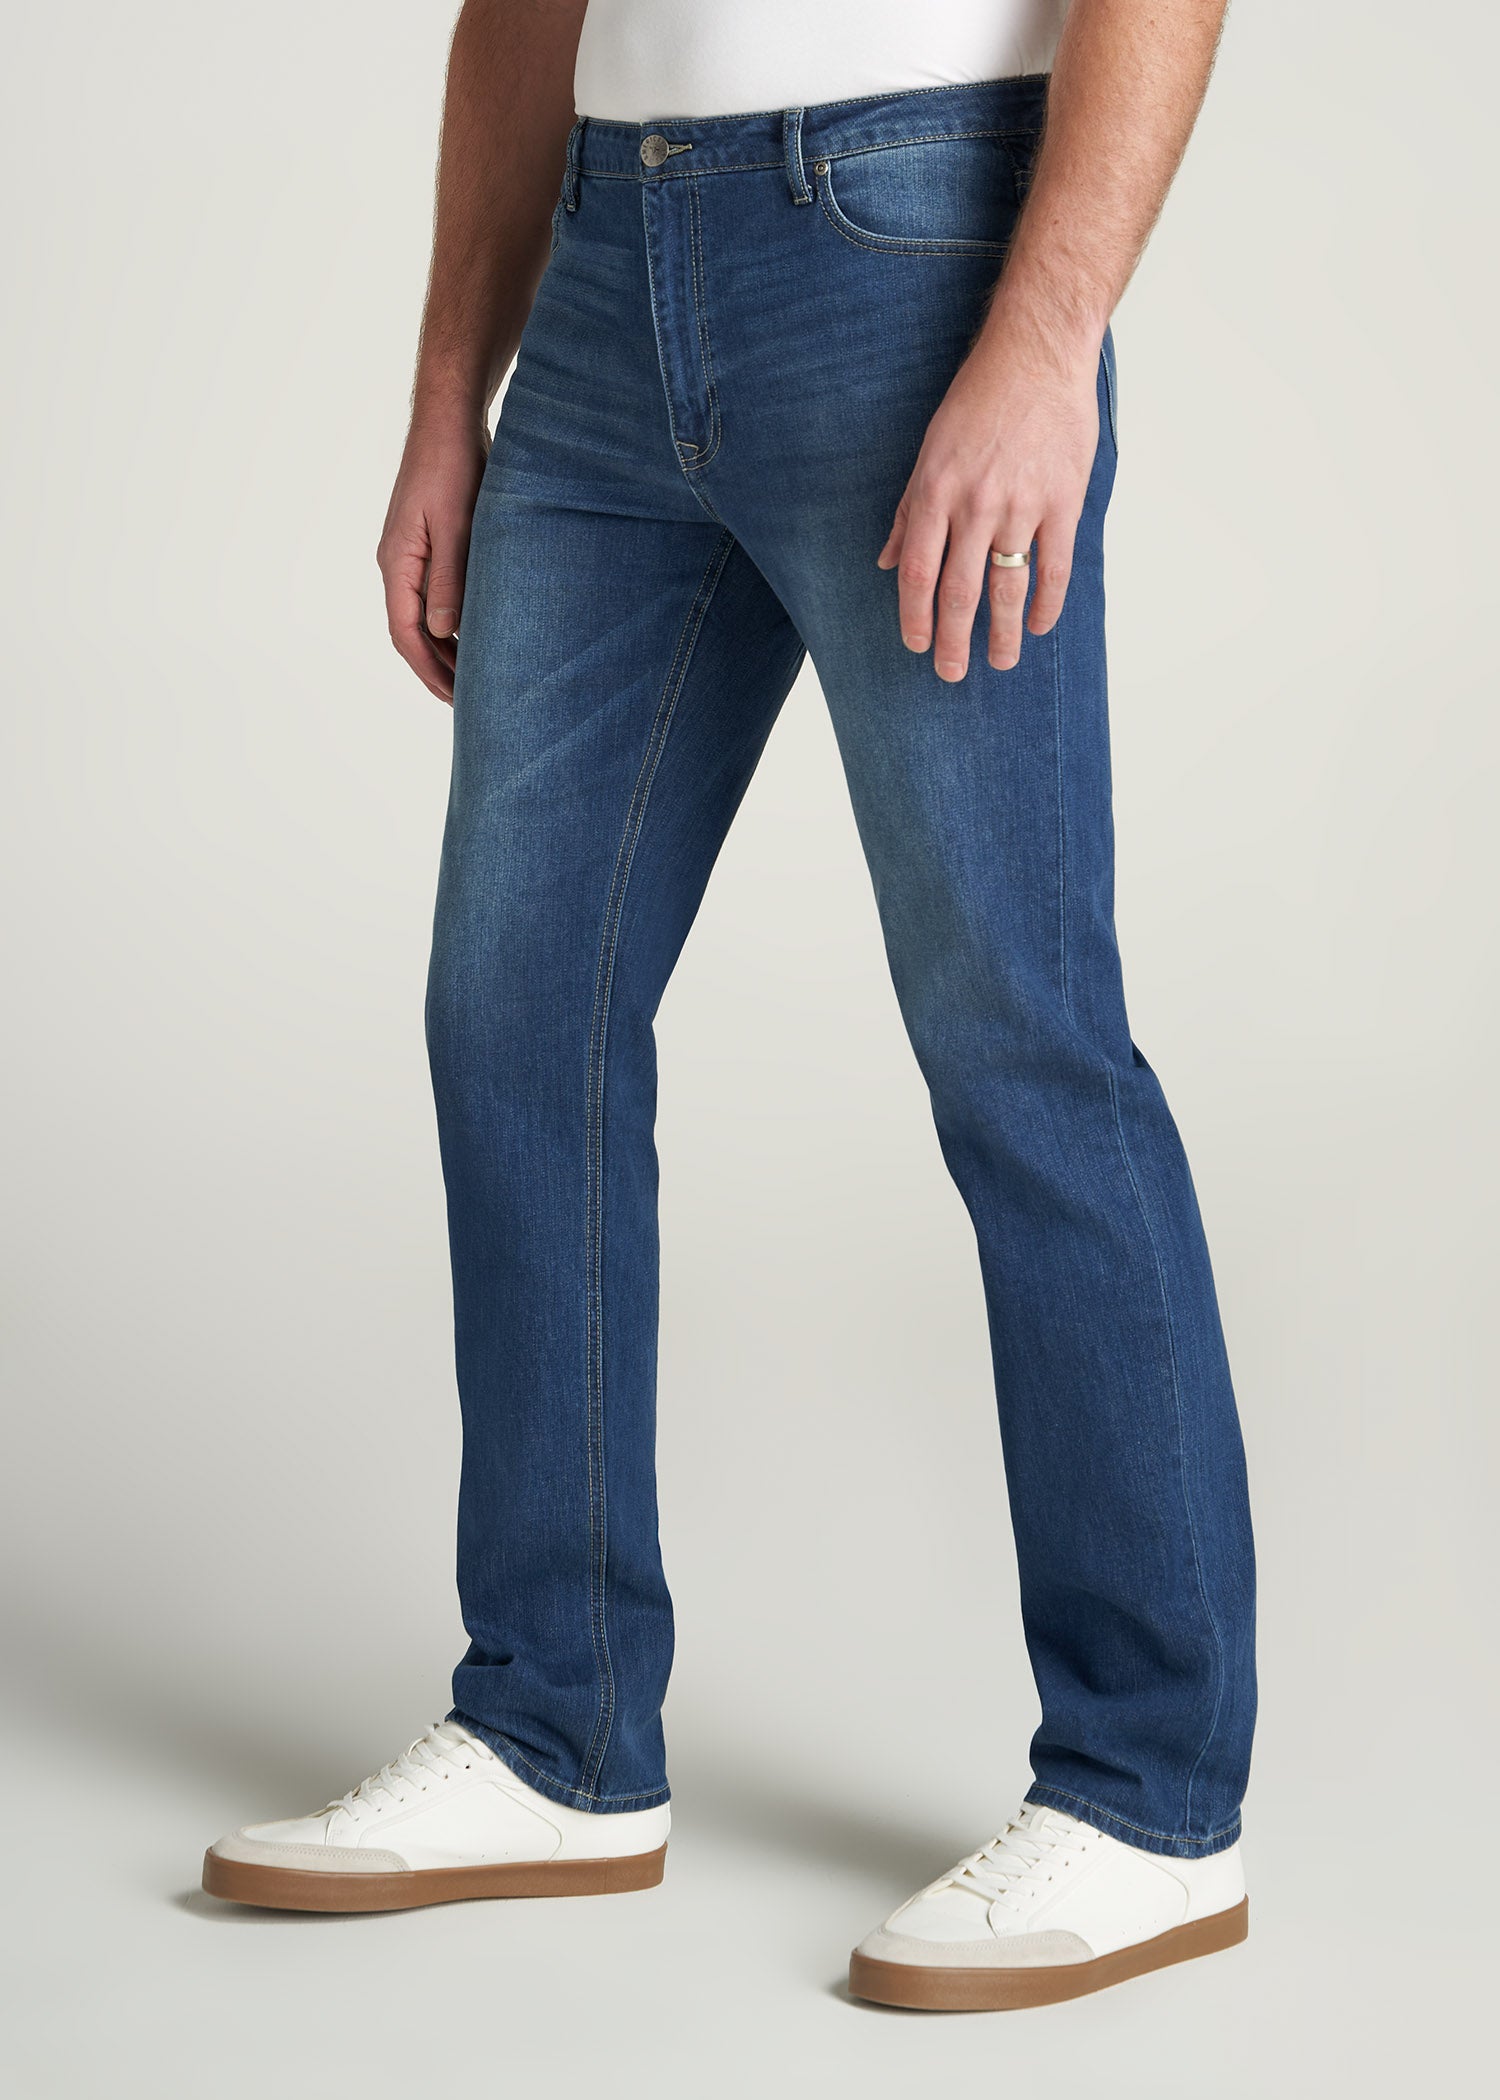 LJ&S STRAIGHT LEG Jeans for Tall Men in Charger Blue